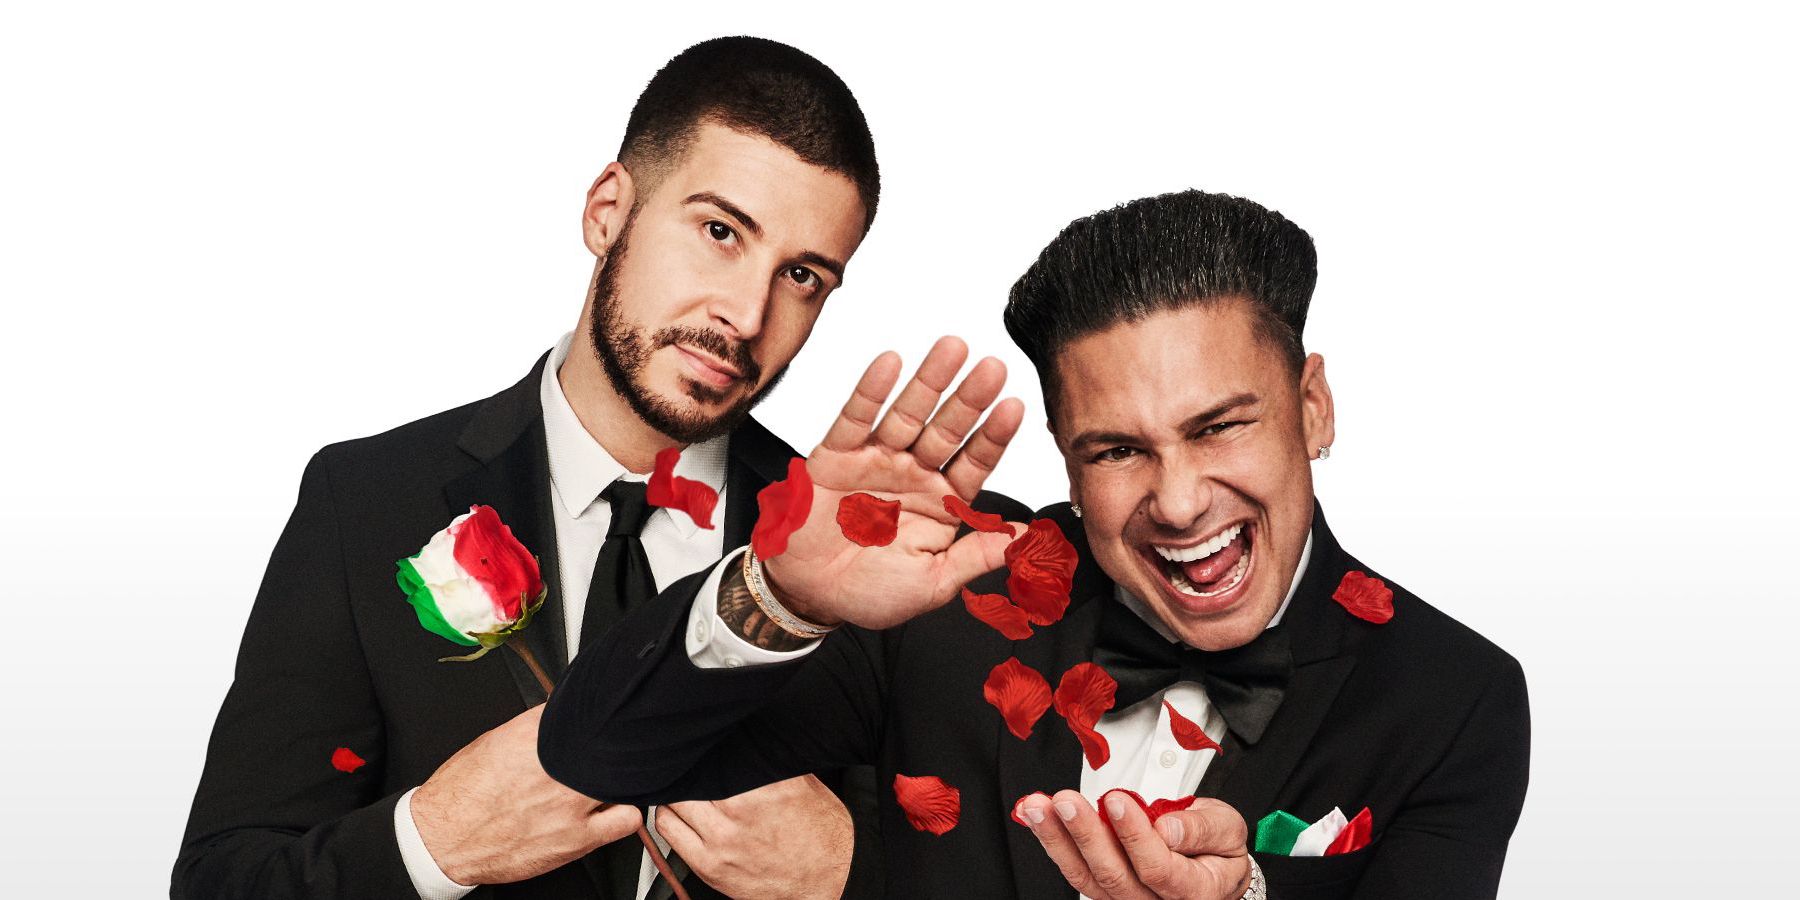 Dj Pauly D and Vinny in a promo image for Double Shot At Love MTV